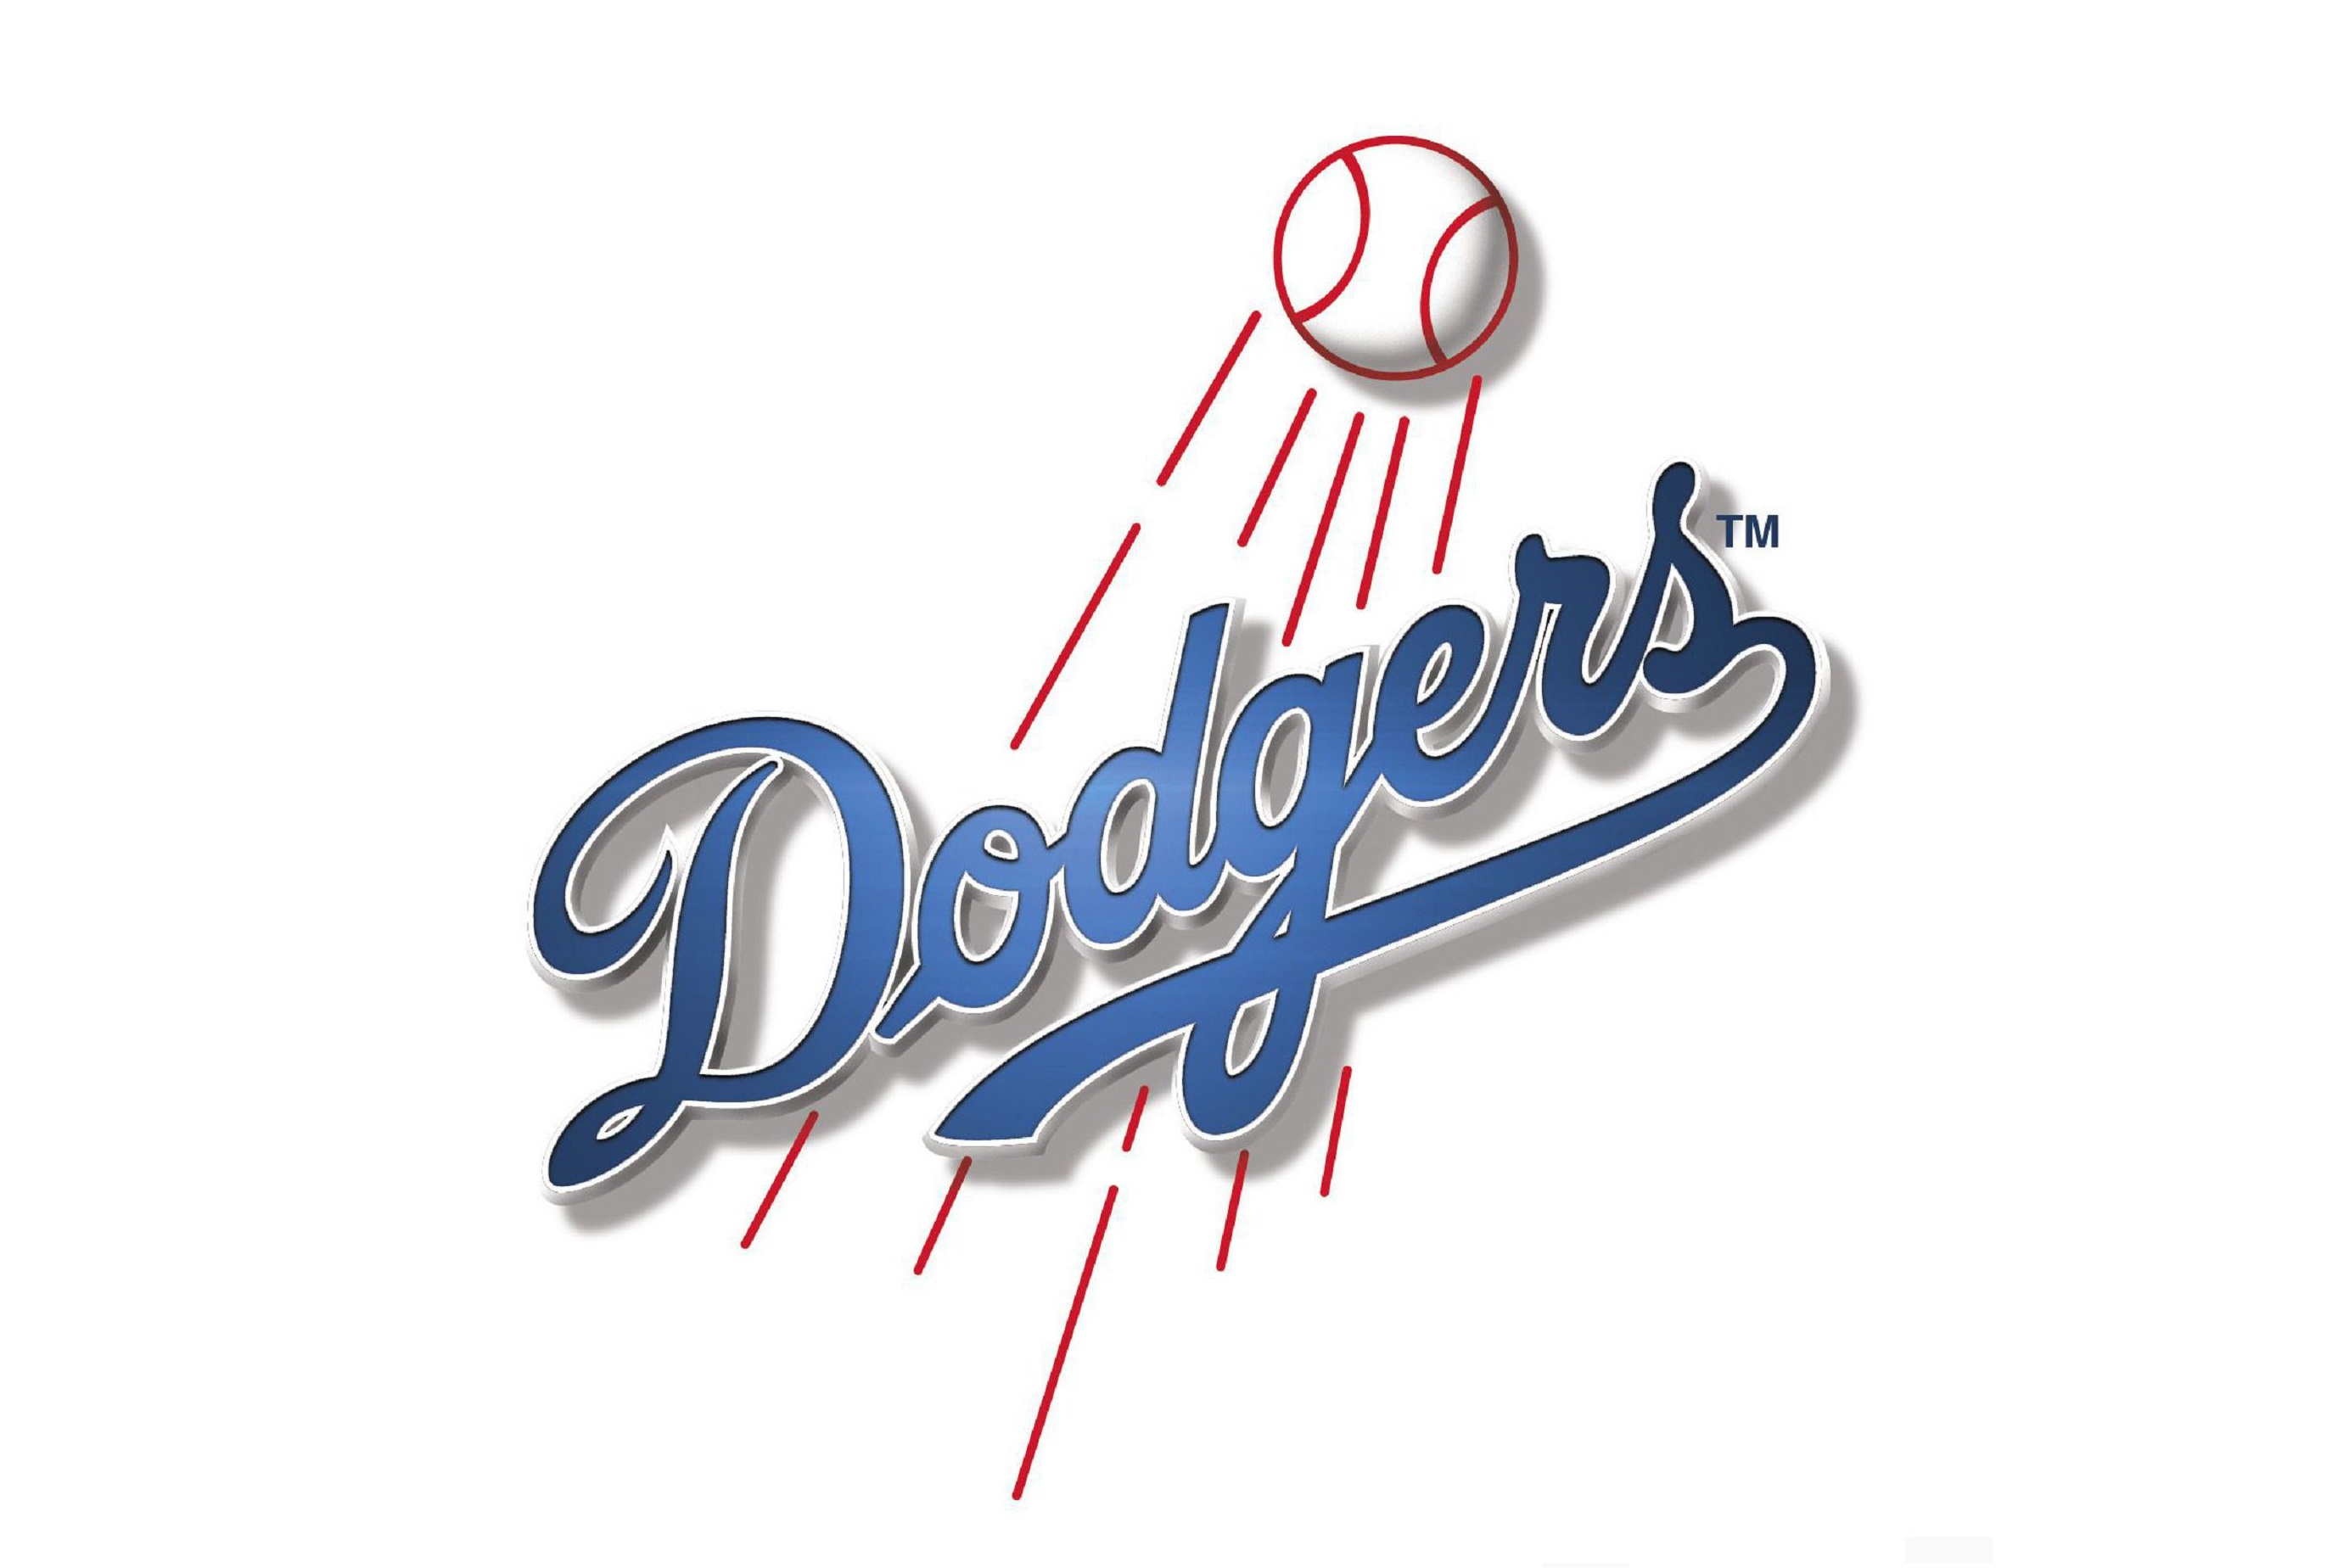 Los Angeles Dodgers Wallpaper Image Photos Pictures Background